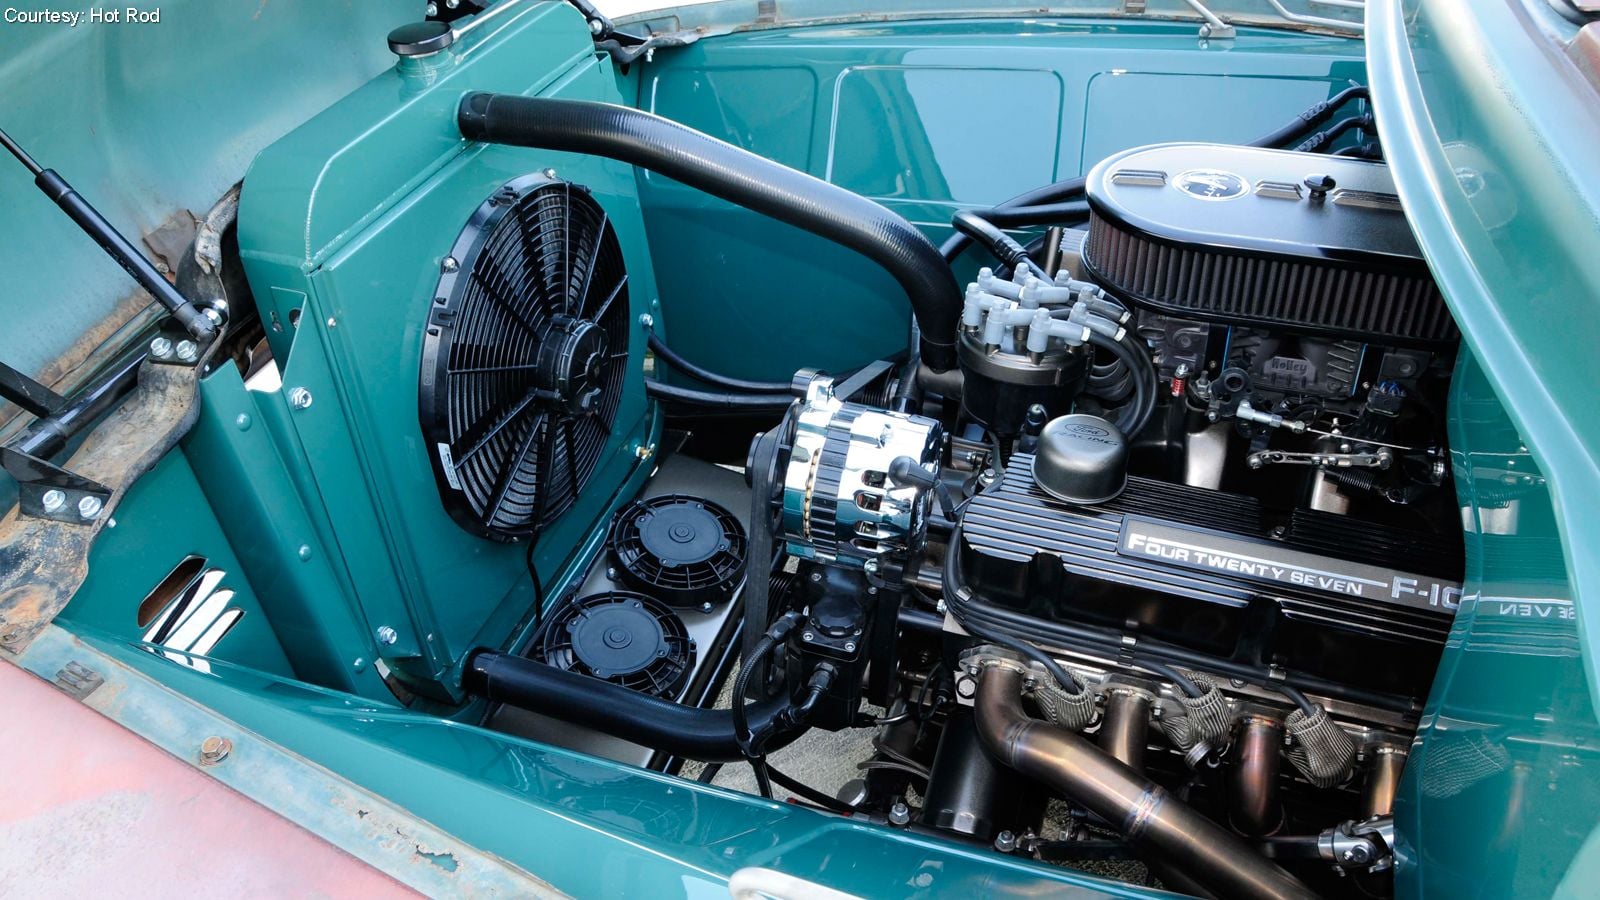 Daily Slideshow: Cleaning the Engine Bay